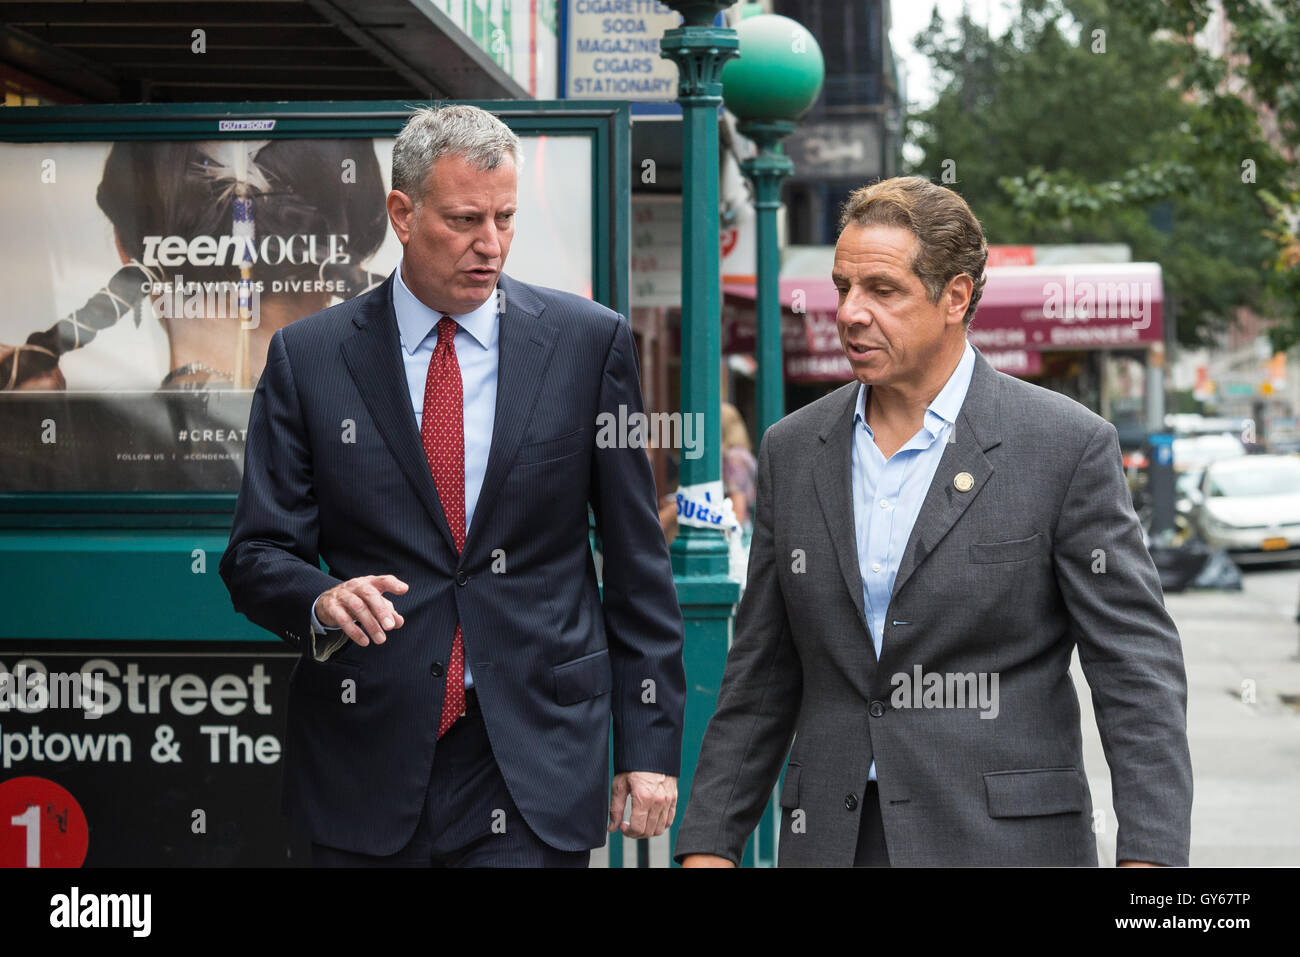 Chelsea, New York, USA. 18th Sept, 2016. New York State Governor Andre Cuomo and New York City Mayor Bill de Blasio toured the site of the bomb explosion on West 23rd Street between Sixth and Seventh Avenues in Manhattan's Chelsea neighborhood, and then stopped at various local businesses to greet proprietors and residents. Credit:  PACIFIC PRESS/Alamy Live News Stock Photo